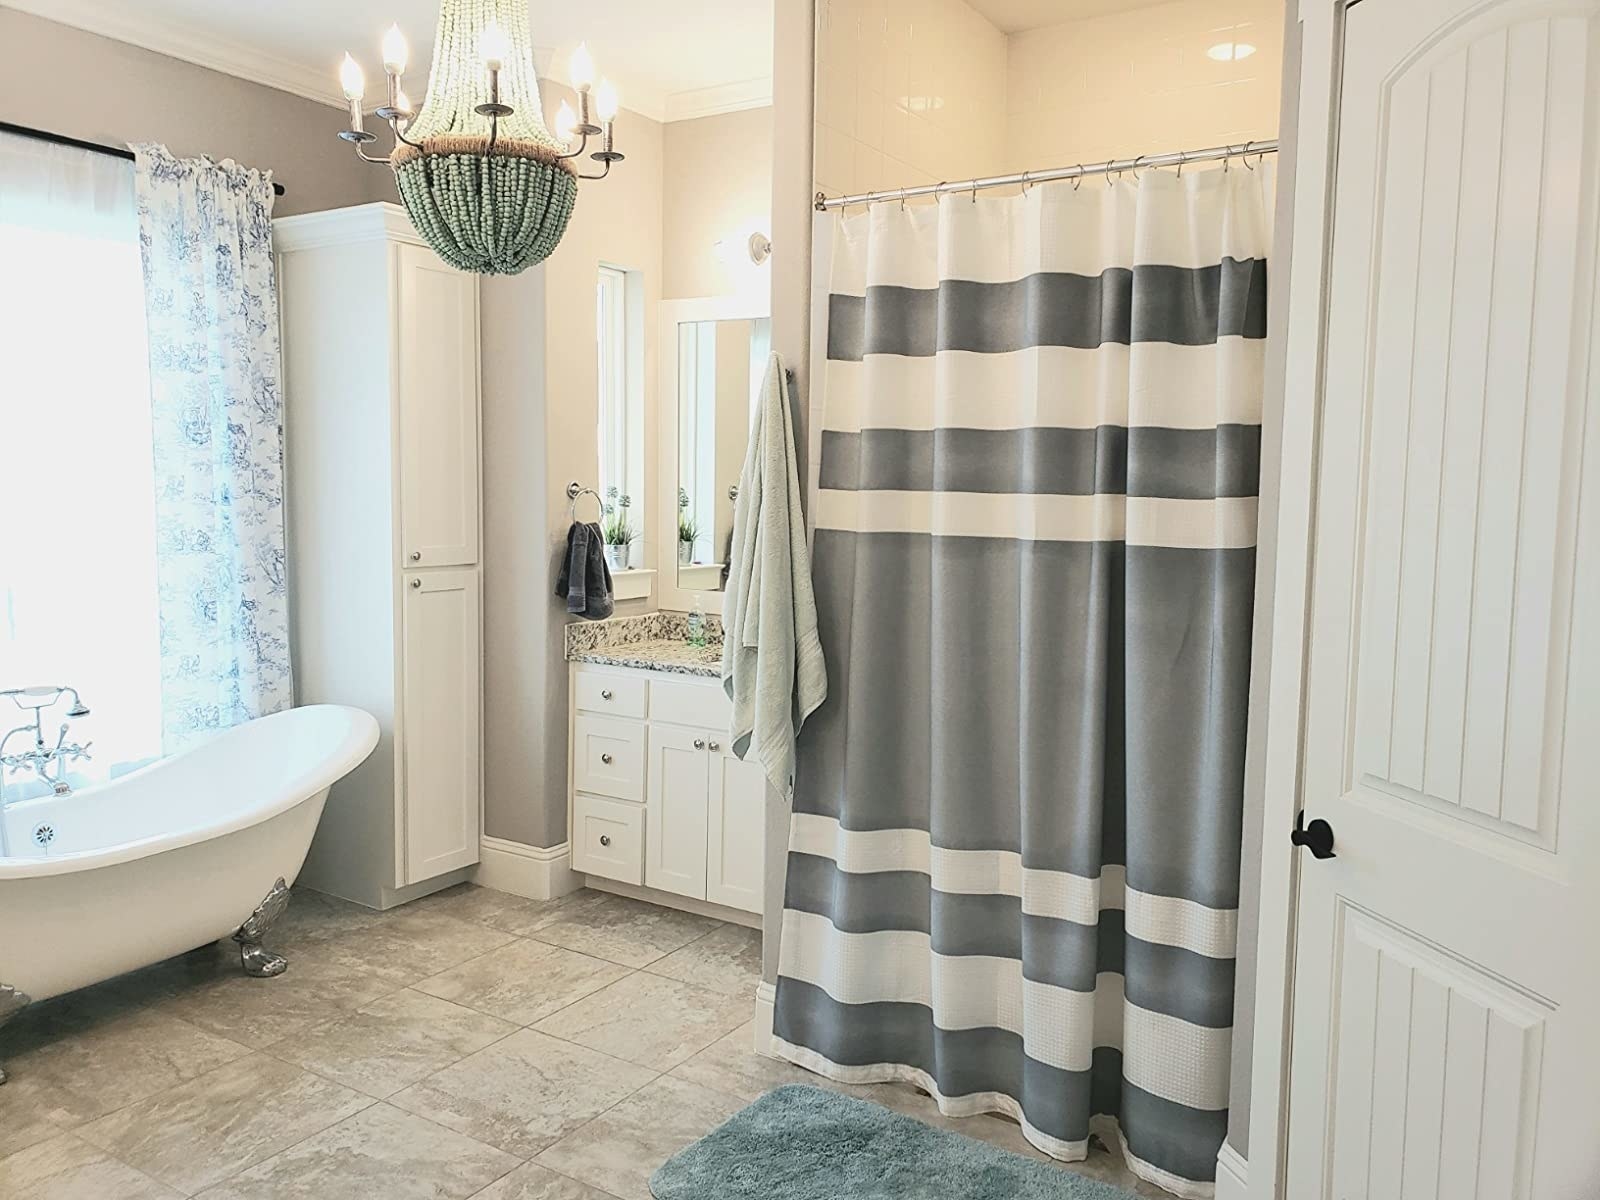 Reviewer photo of their bathroom with a white and grey striped shower curtain